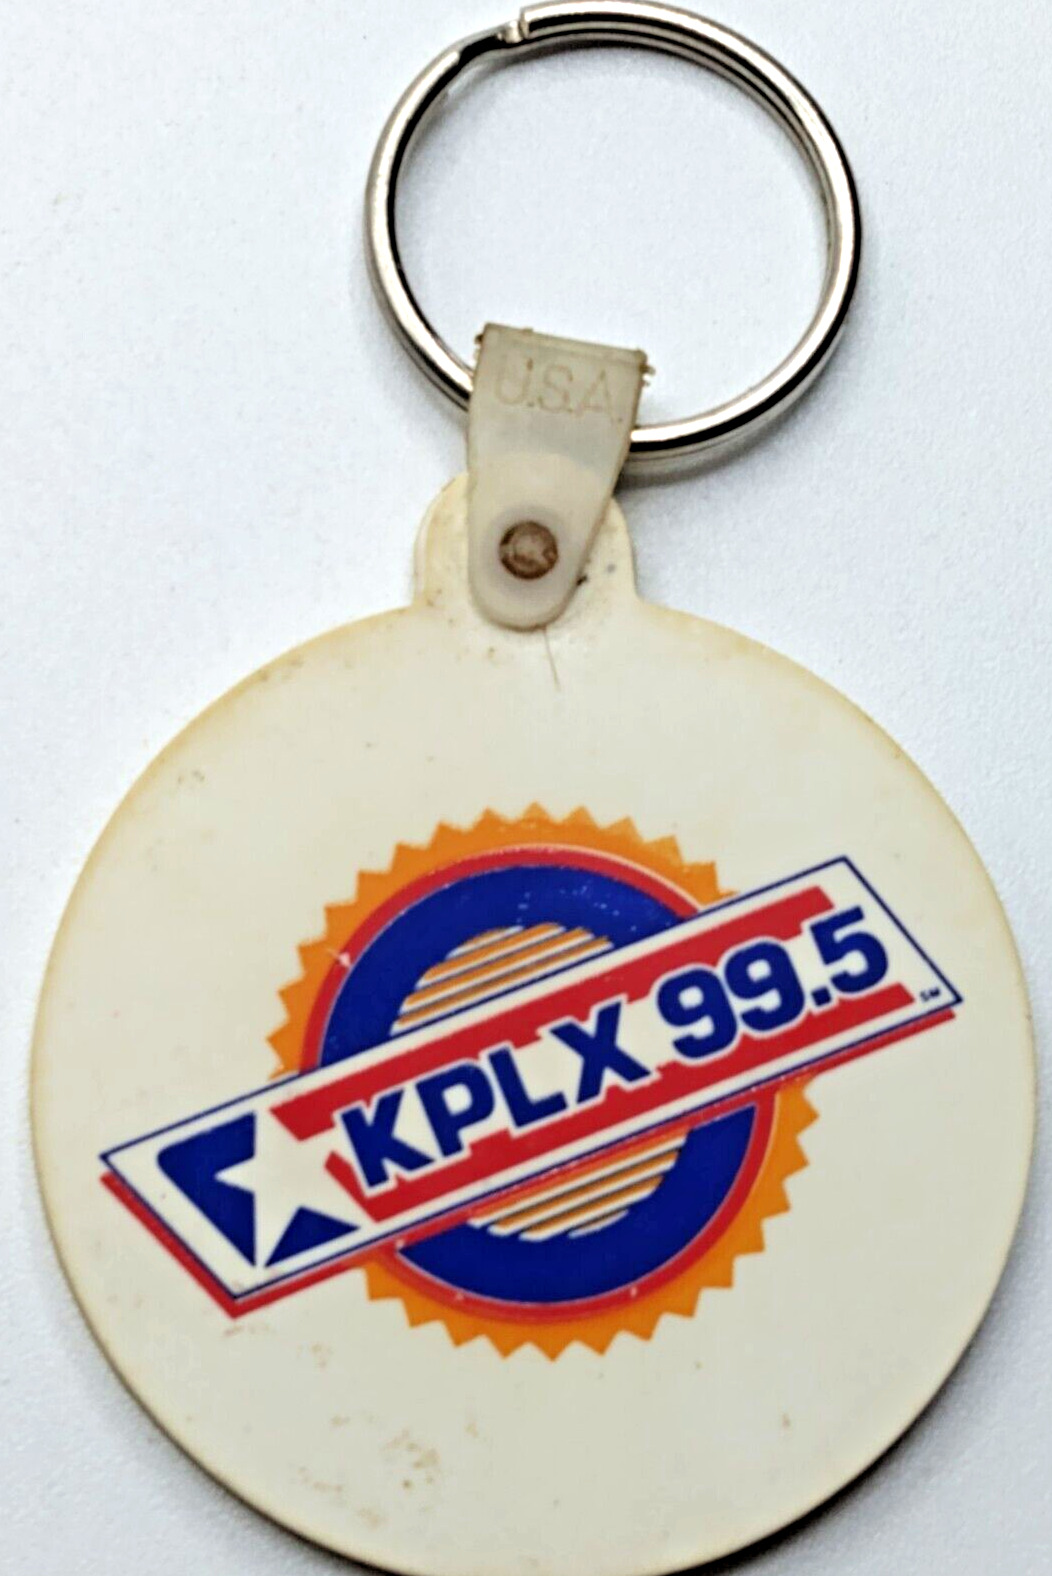 Vintage Keychain KPLX 99.5 Texas Country Music Station Channel White Plastic 331